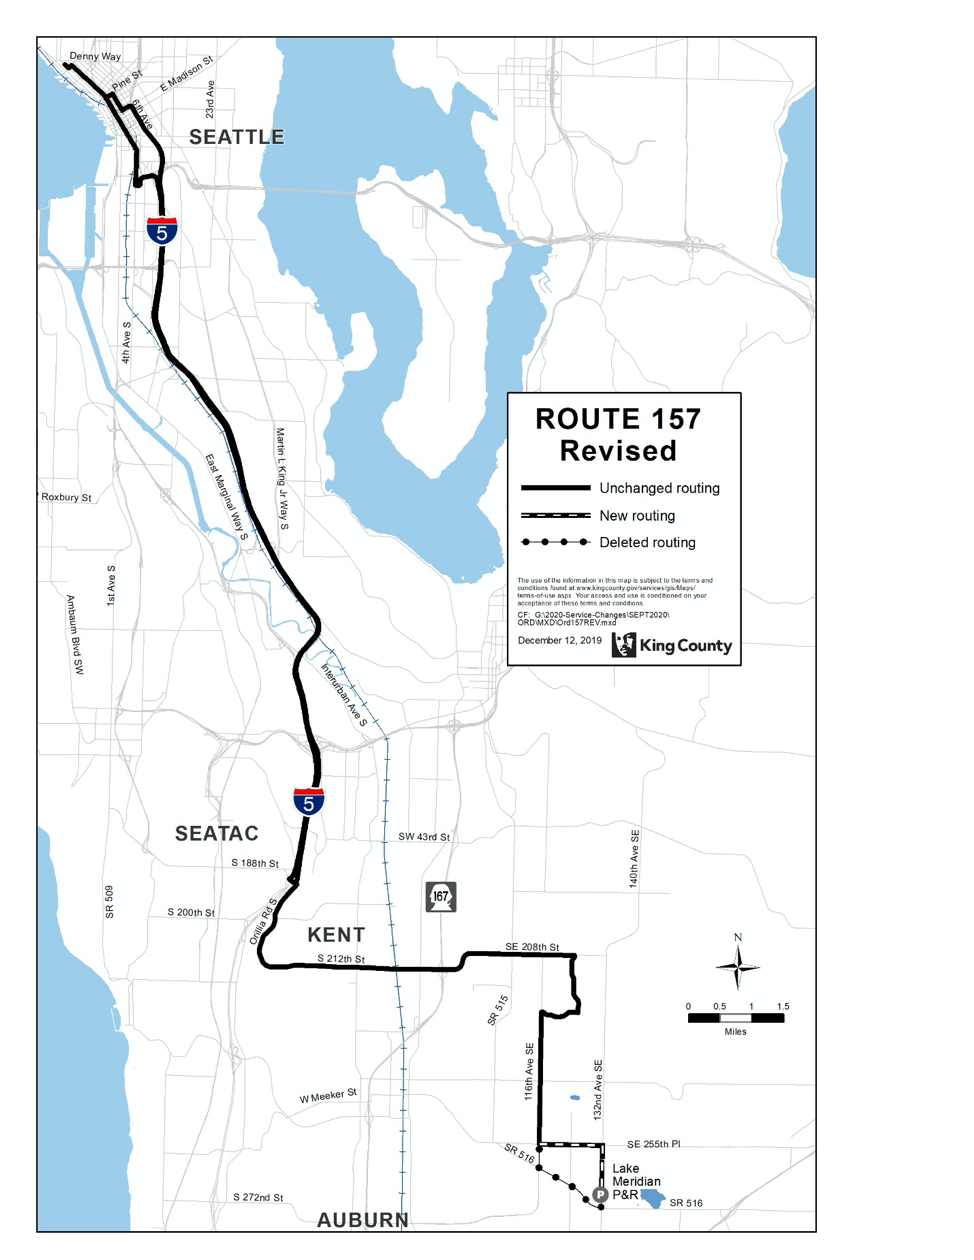 Revised Route 157. (King County)